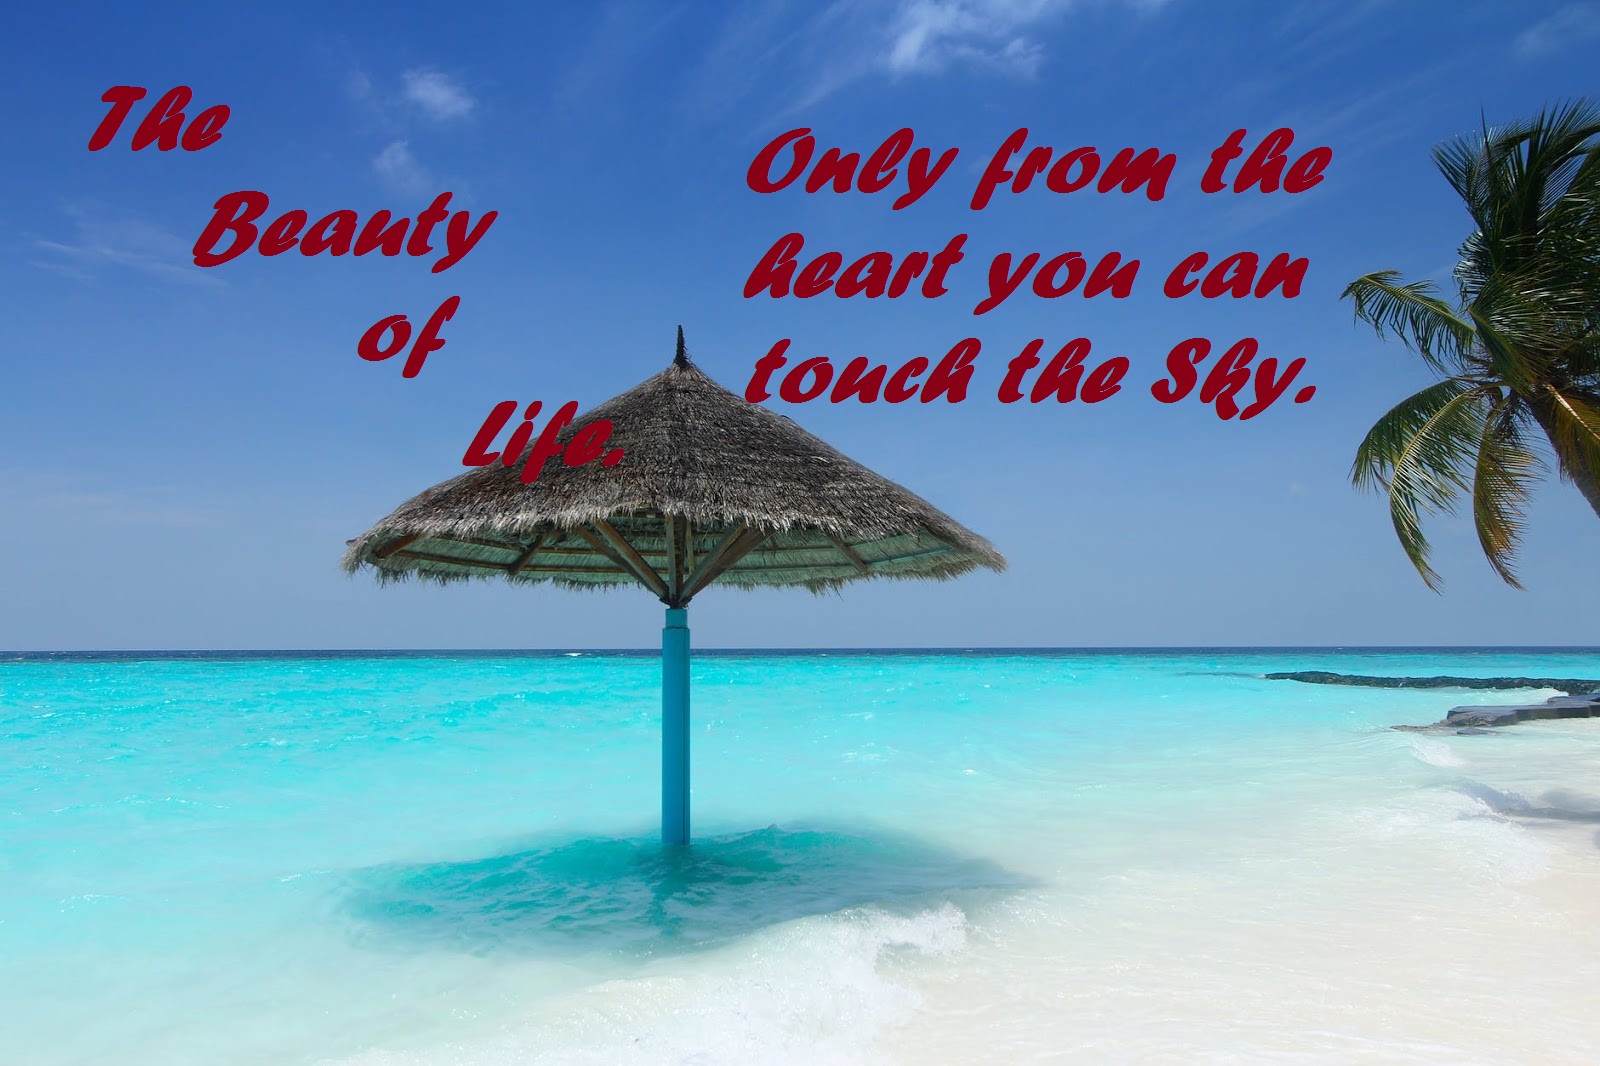 The Beauty Of Life Only From The Heart You Can Touch The Sky